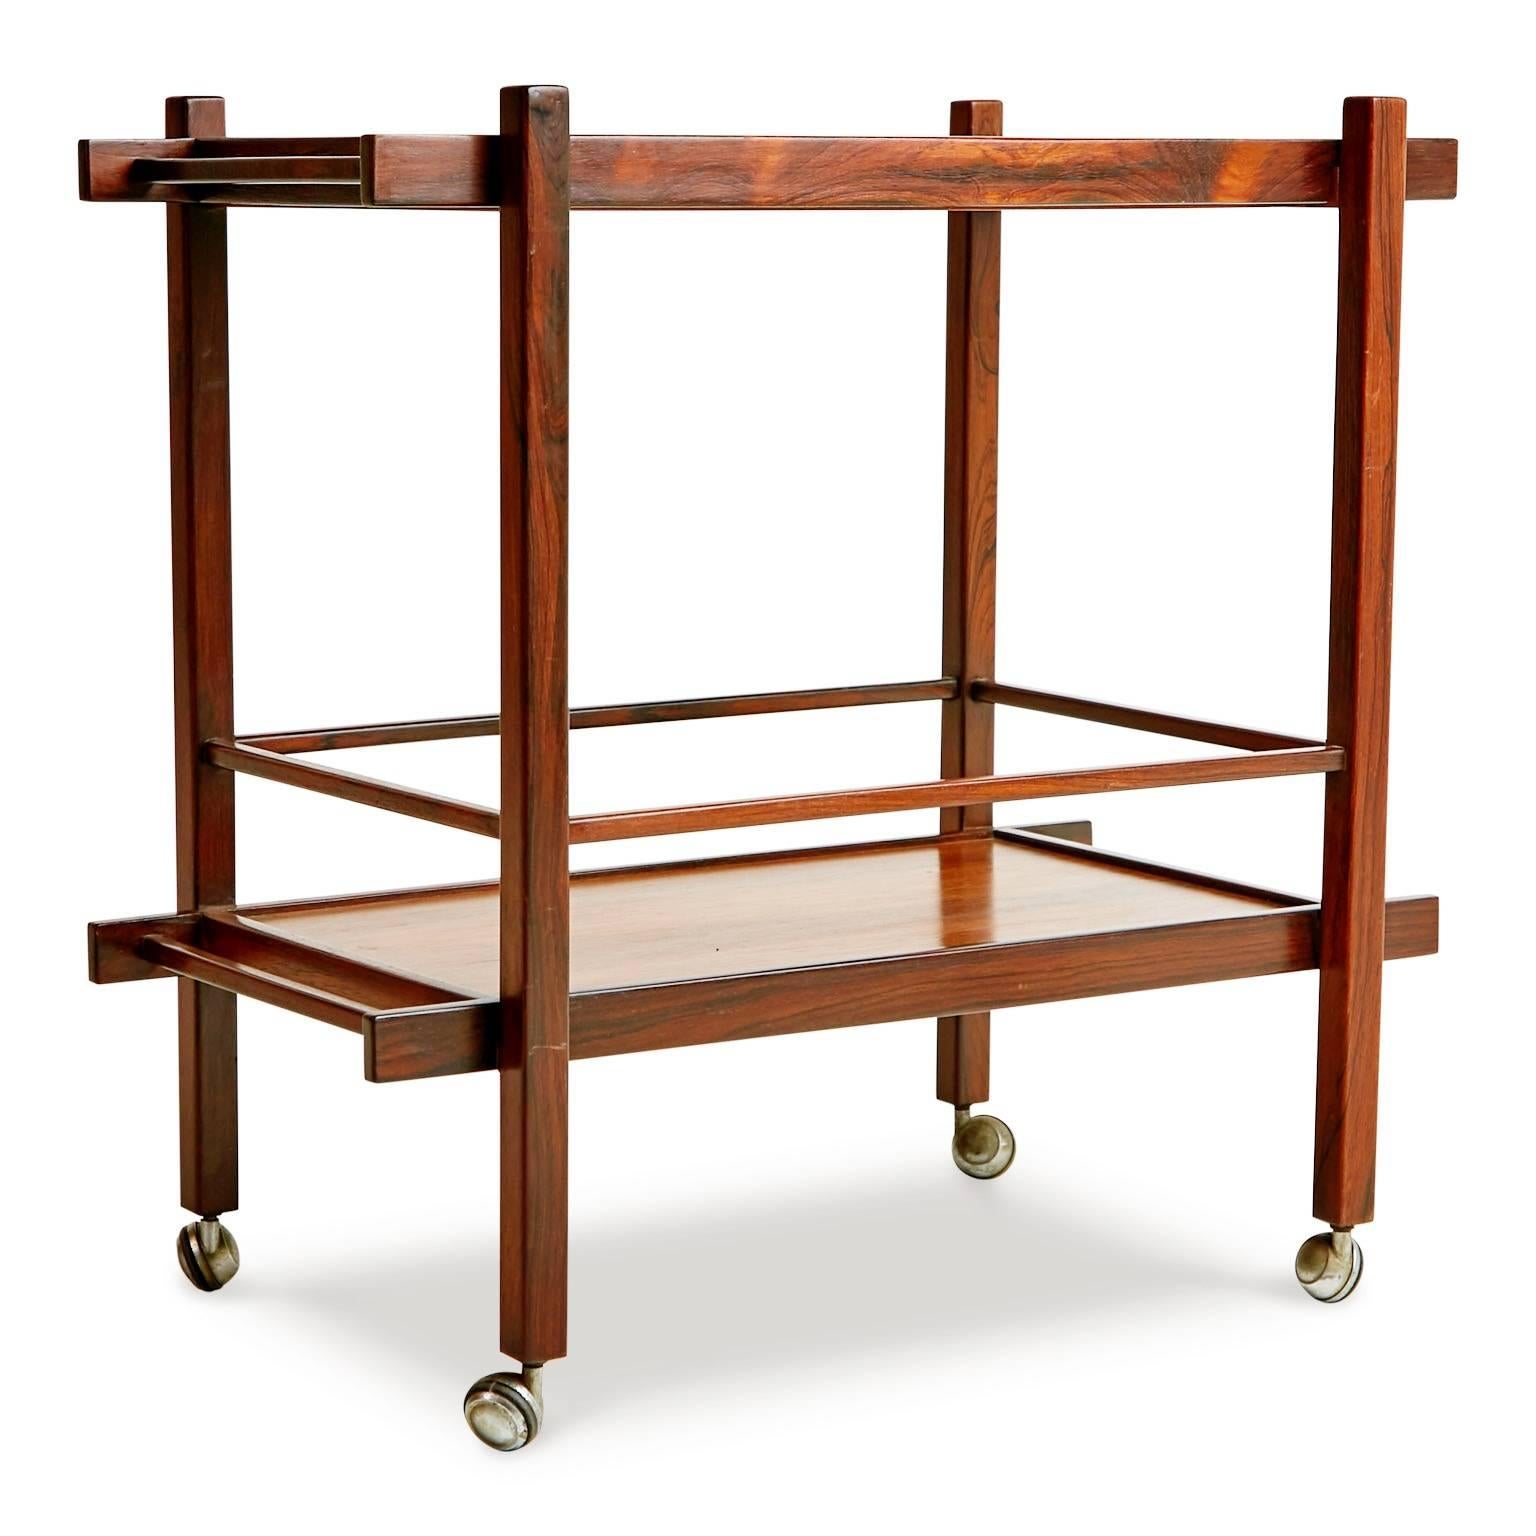 Slenderly proportioned Brazilian bar cart attributed to Sergio Rodrigues for OCA with removable tray which has been recently refinished with. This sleekly designed drinks trolley is fabricated from jacaranda (rosewood) with beautiful color variation